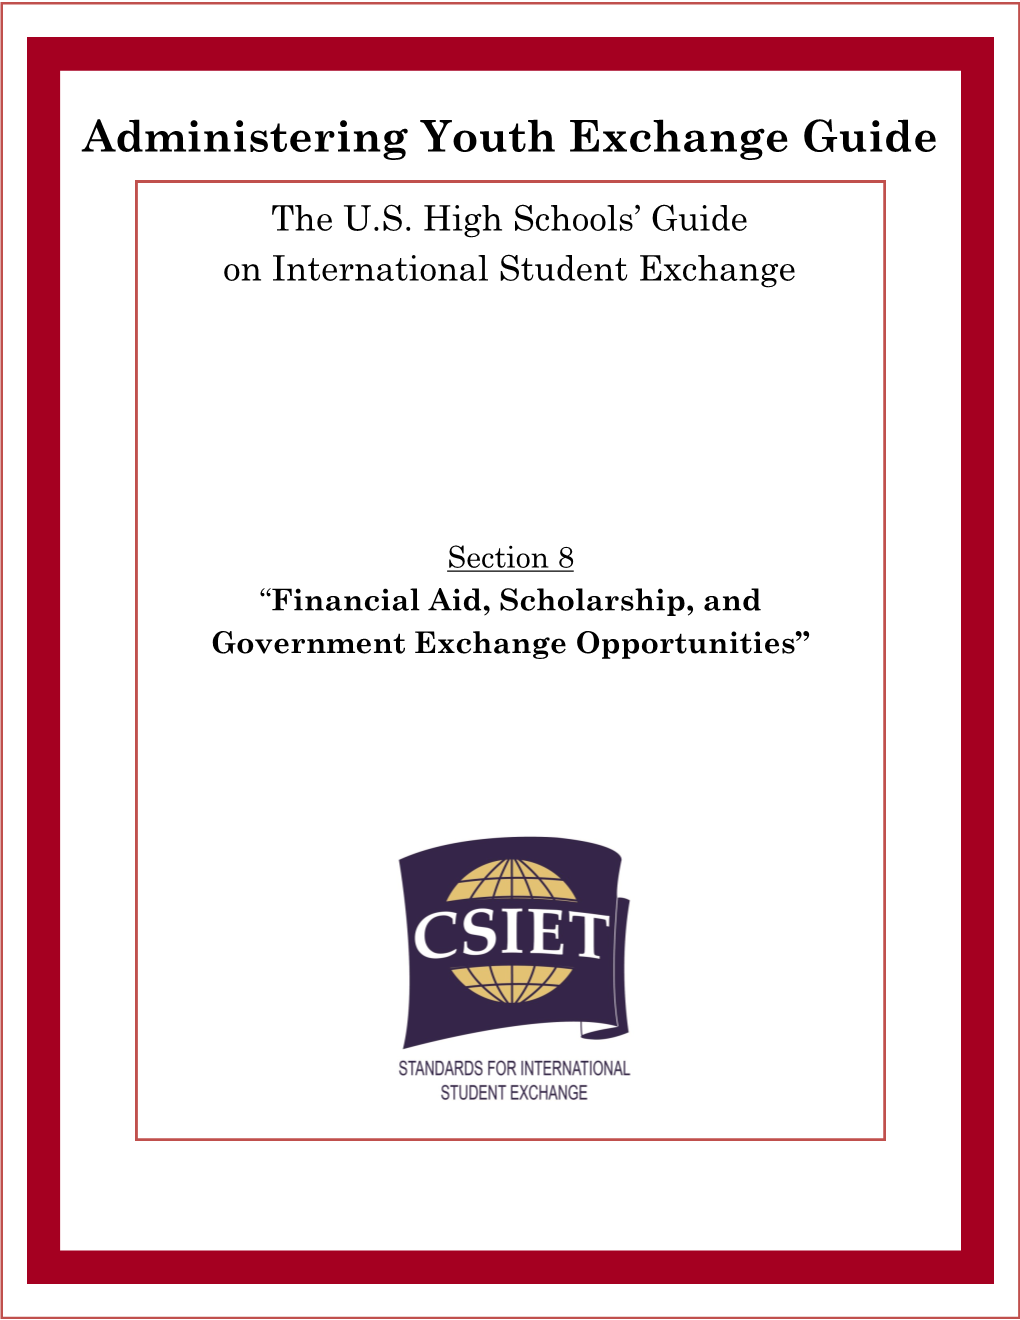 Administering Youth Exchange Guide